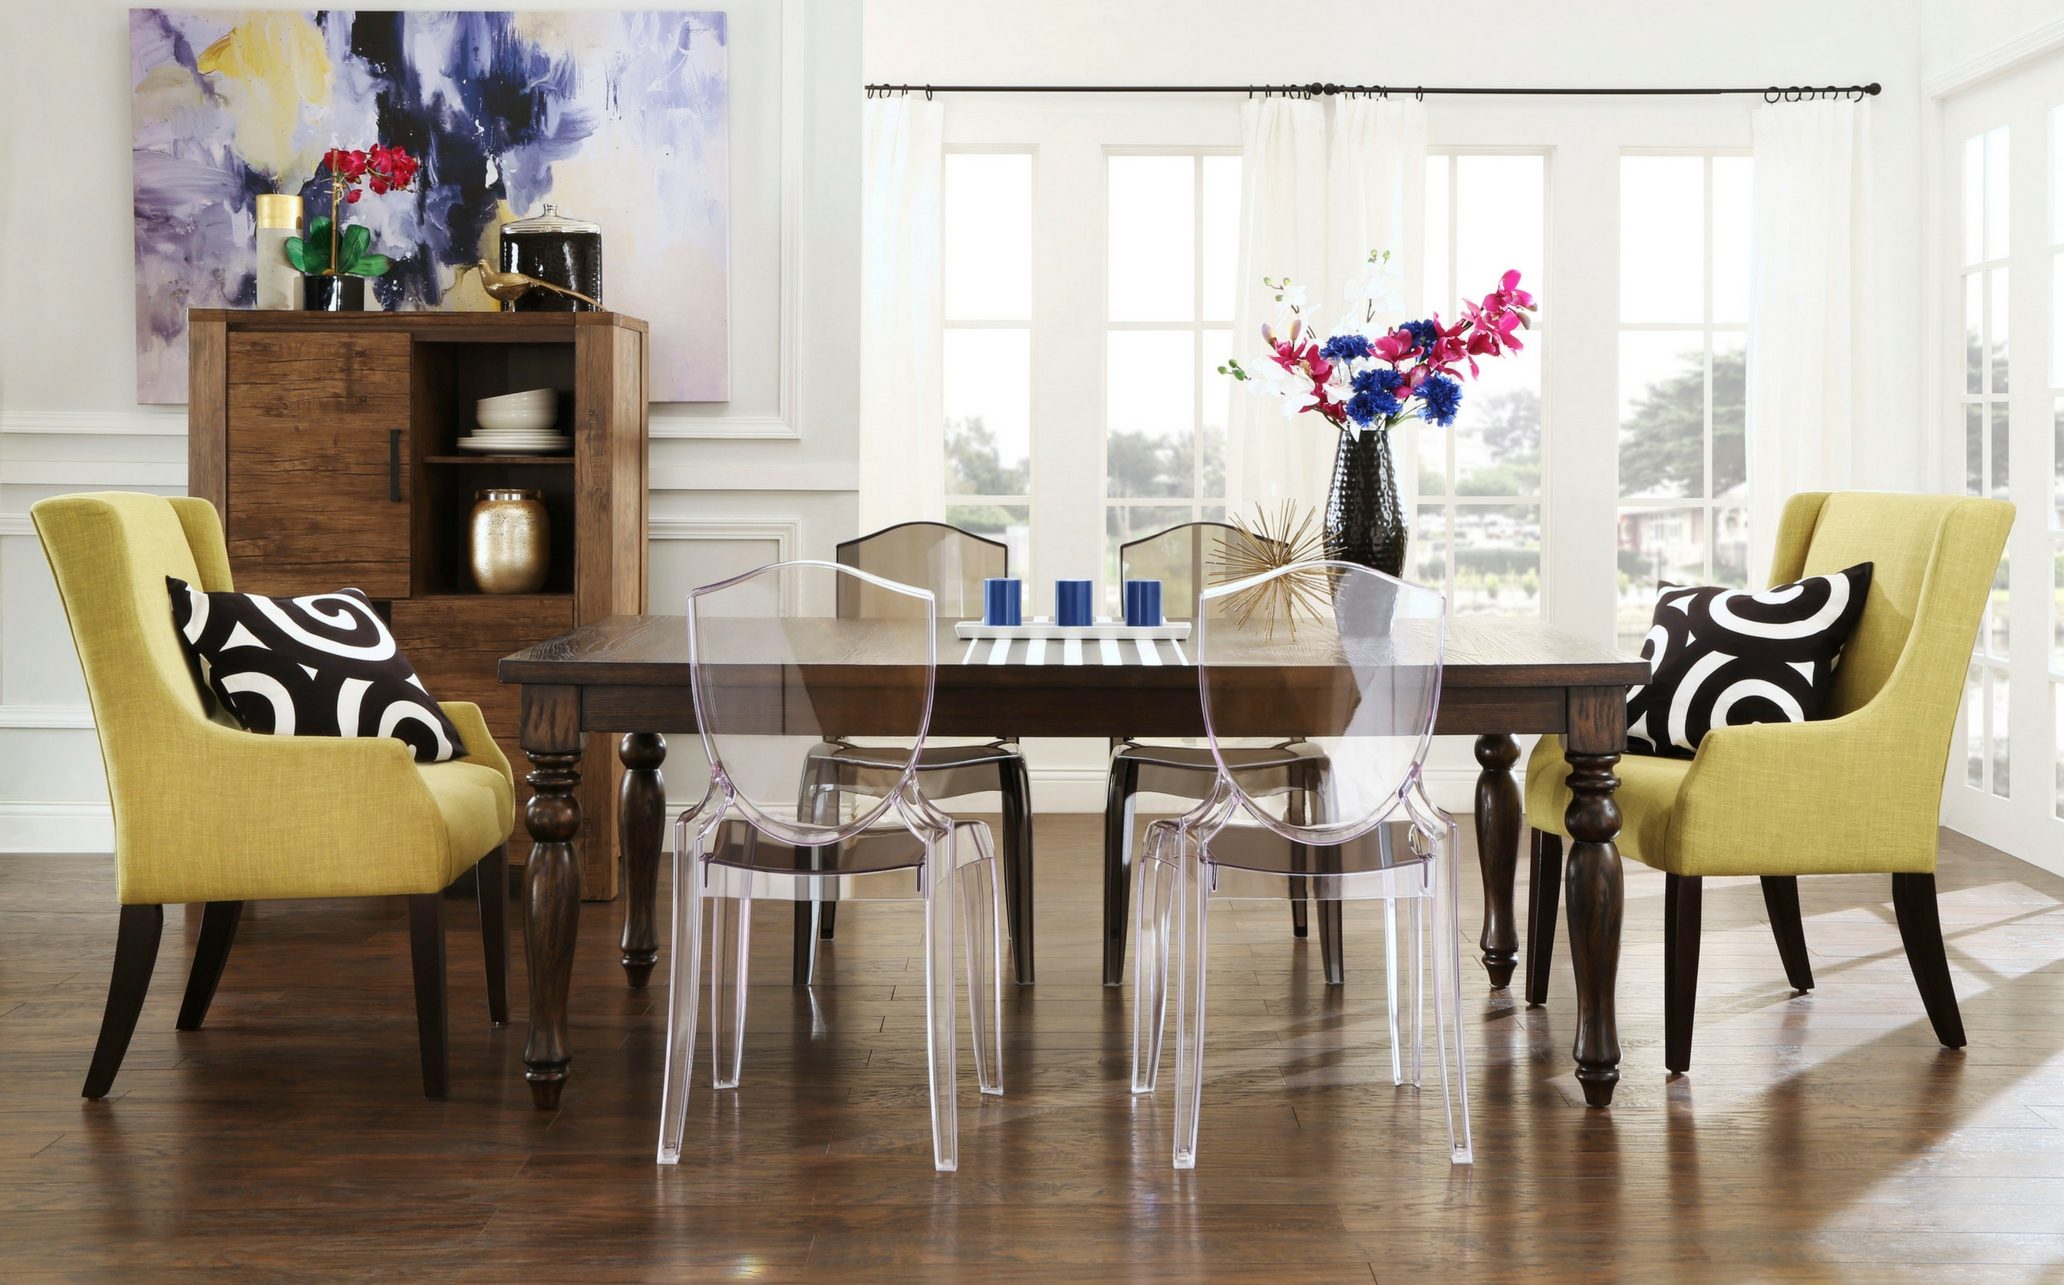 This eclectic mix features a traditional wood dark brown rectangular dining table. There are four clear acrylic dining chairs and two light green hostess chairs, one on each end of the table. Black and white accessories decorate the dining set.